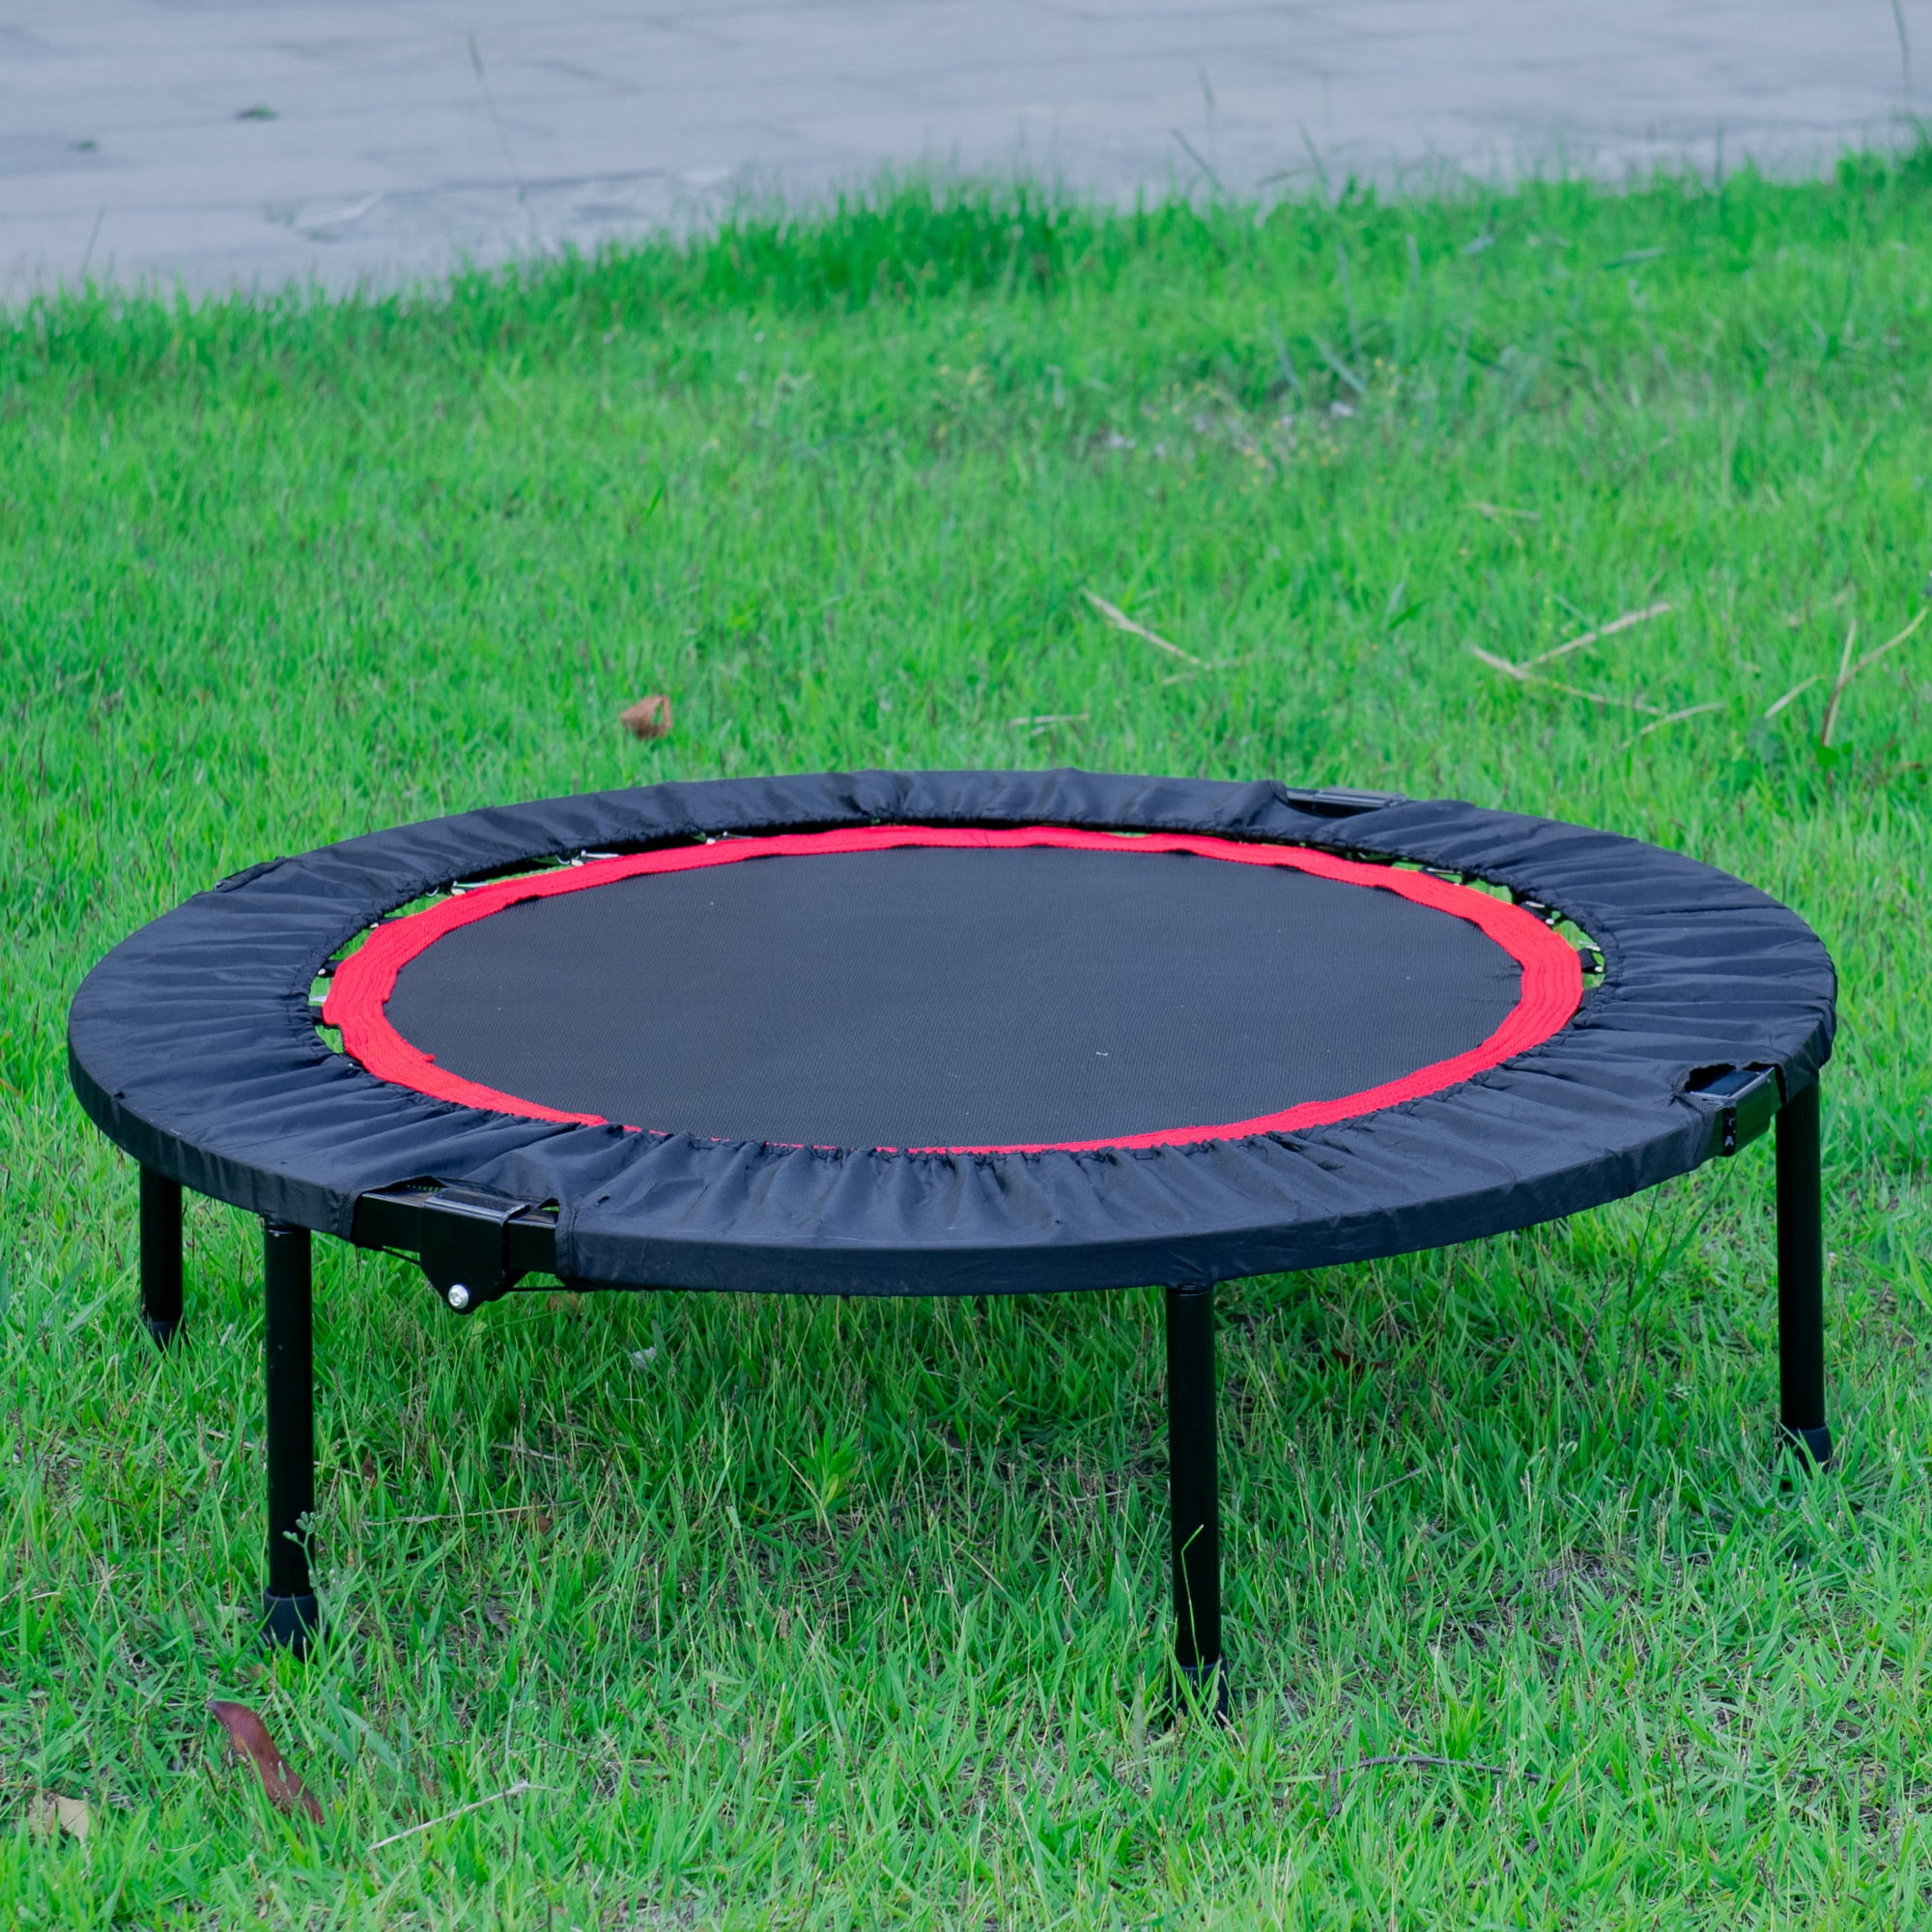 Indoor/Outdoor Exercise Mini Trampoline for Kids Adults Foldable Rebounder Trampoline with Safety Pad DlandHome 40 Inch Fitness Trampoline PSBC-002